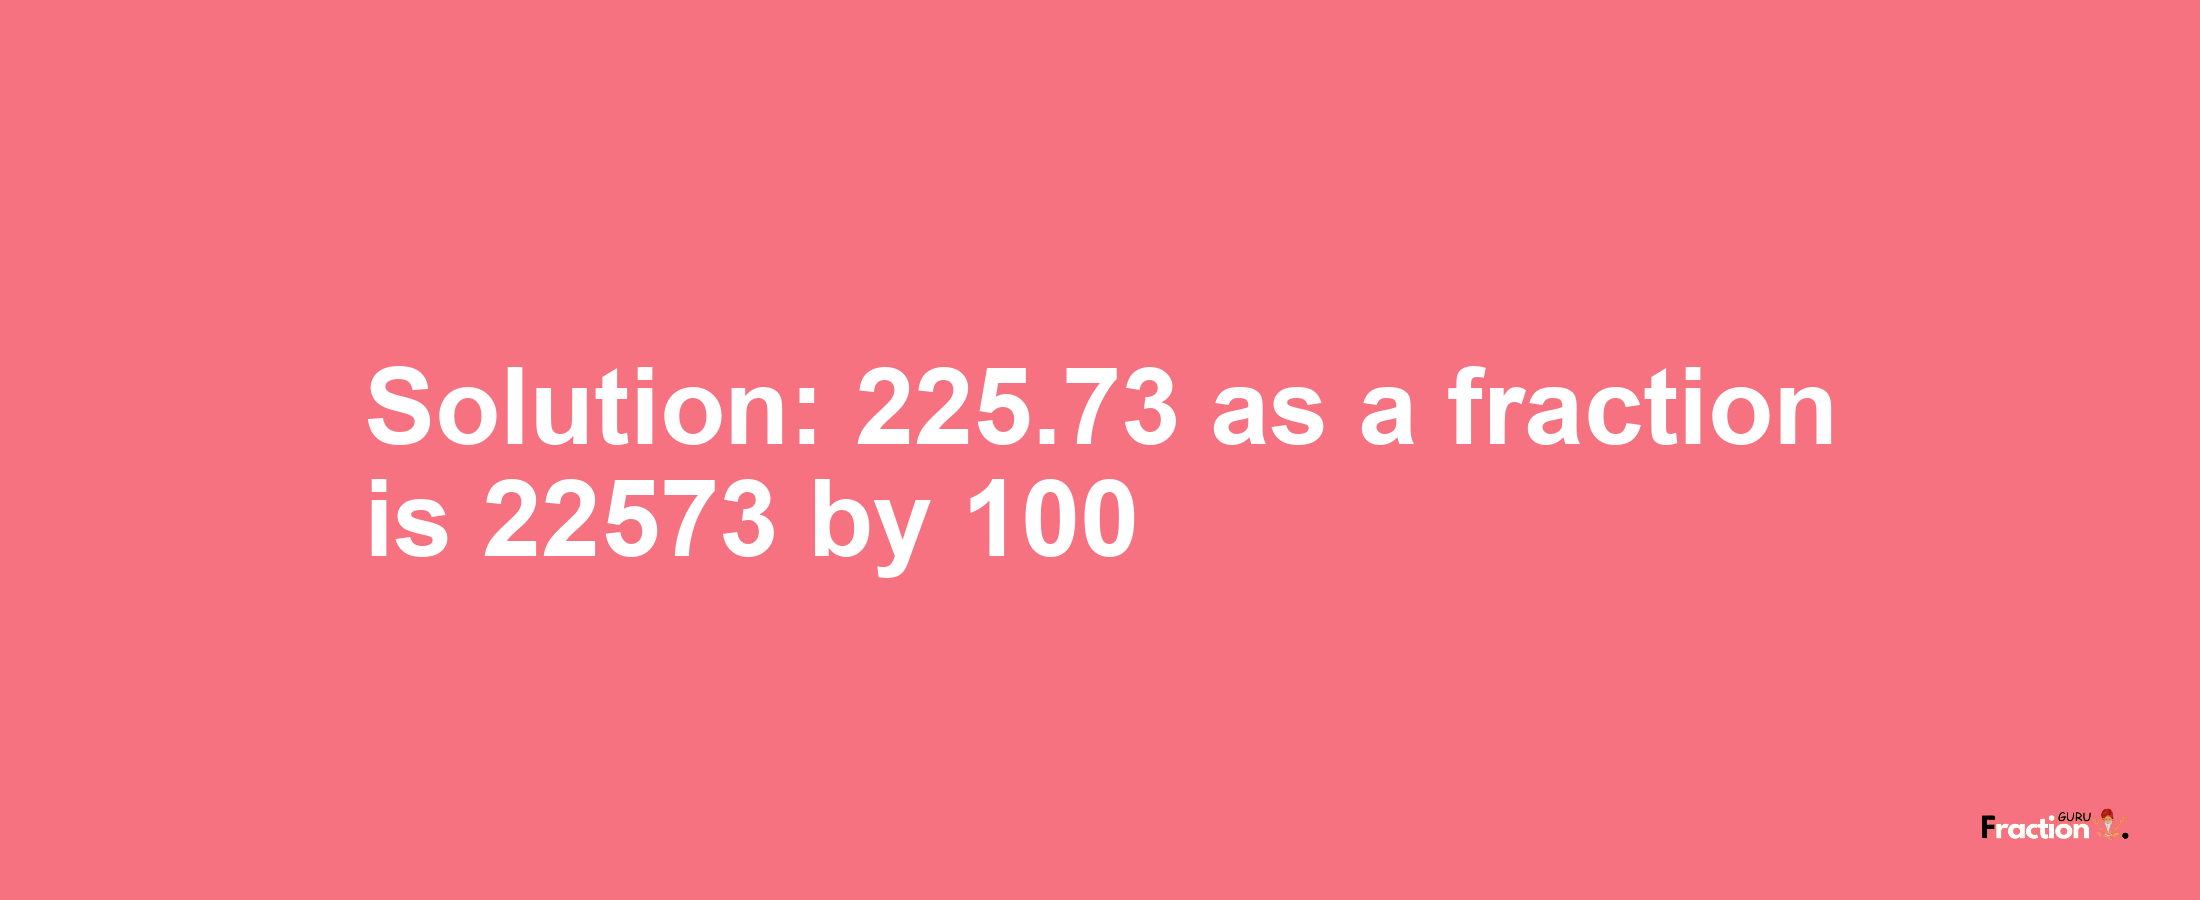 Solution:225.73 as a fraction is 22573/100